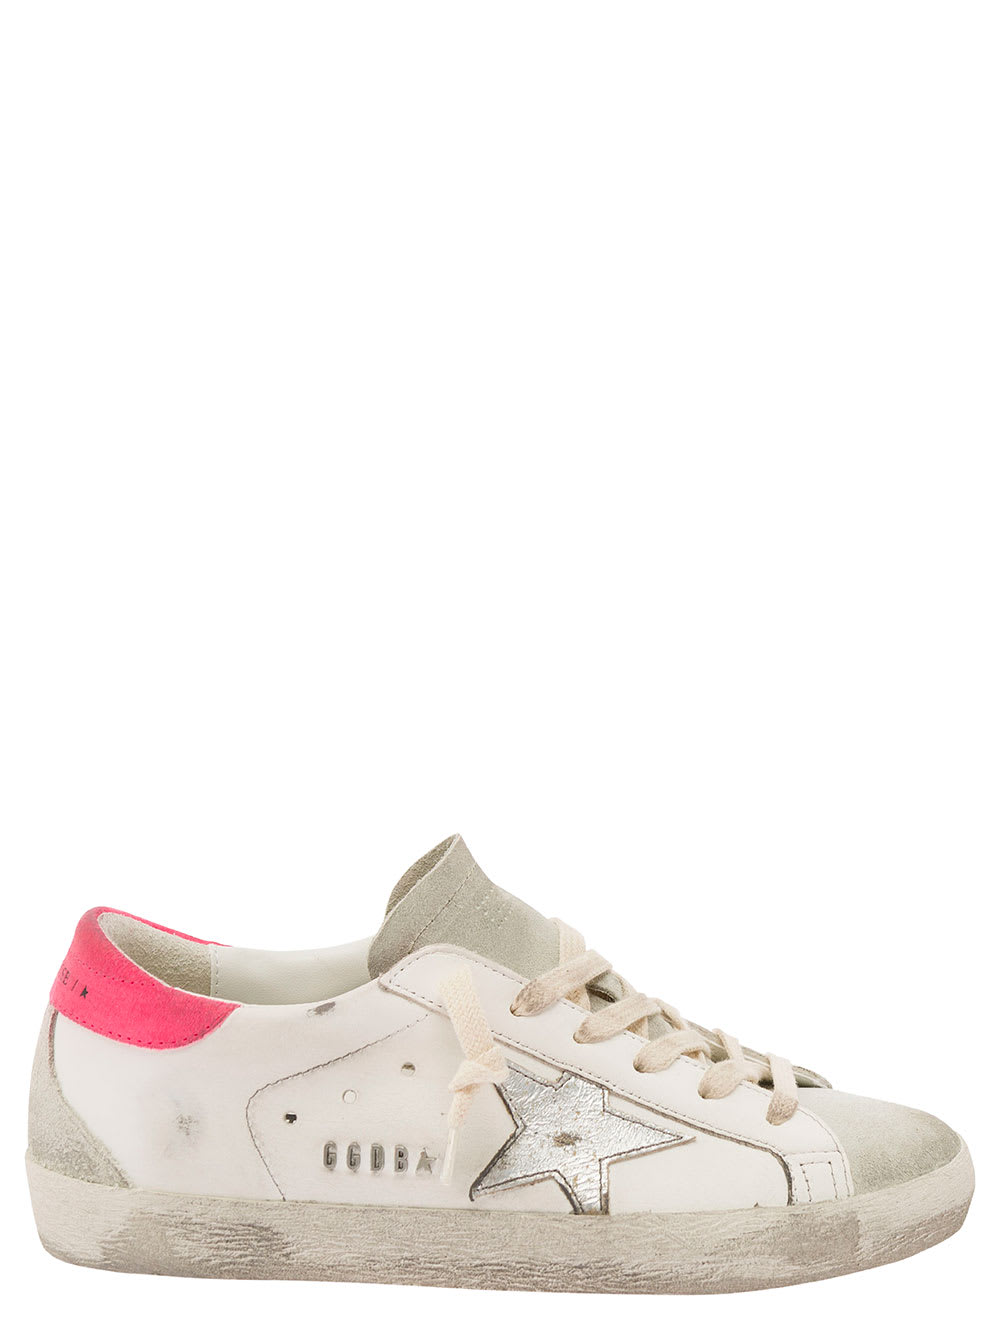 GOLDEN GOOSE SUPERSTAR WHITE LOW TOP VINTAGE EFFECT SNEAKERS WITH STAR DETAIL IN LEATHER WOMAN